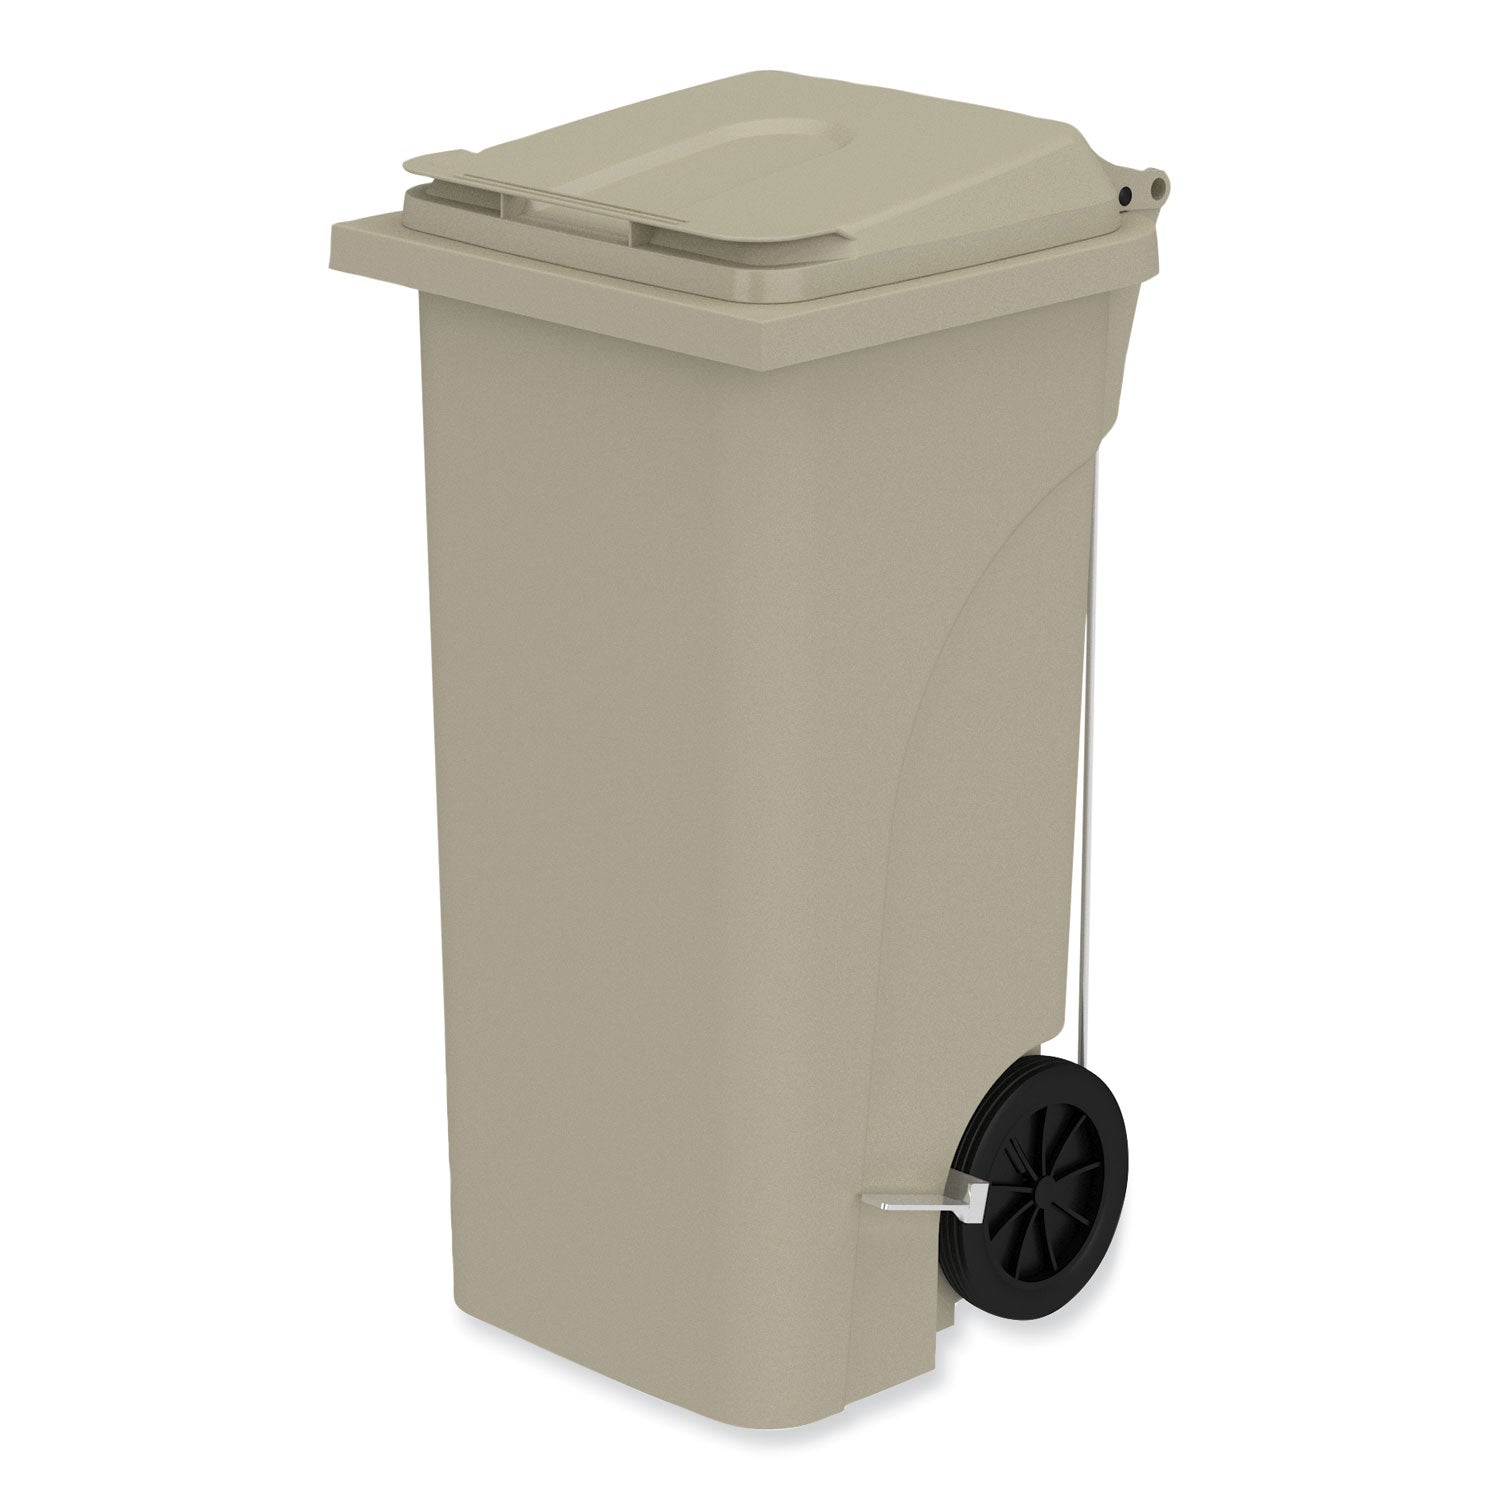 Safco 32 Gallon Plastic Step-On Receptacle - 32 gal Capacity - Foot Pedal, Lightweight, Easy to Clean, Handle, Wheels, Mobility - 37" Height x 21.3" Width x 20" Depth - Plastic - Tan - 1 Carton - 1